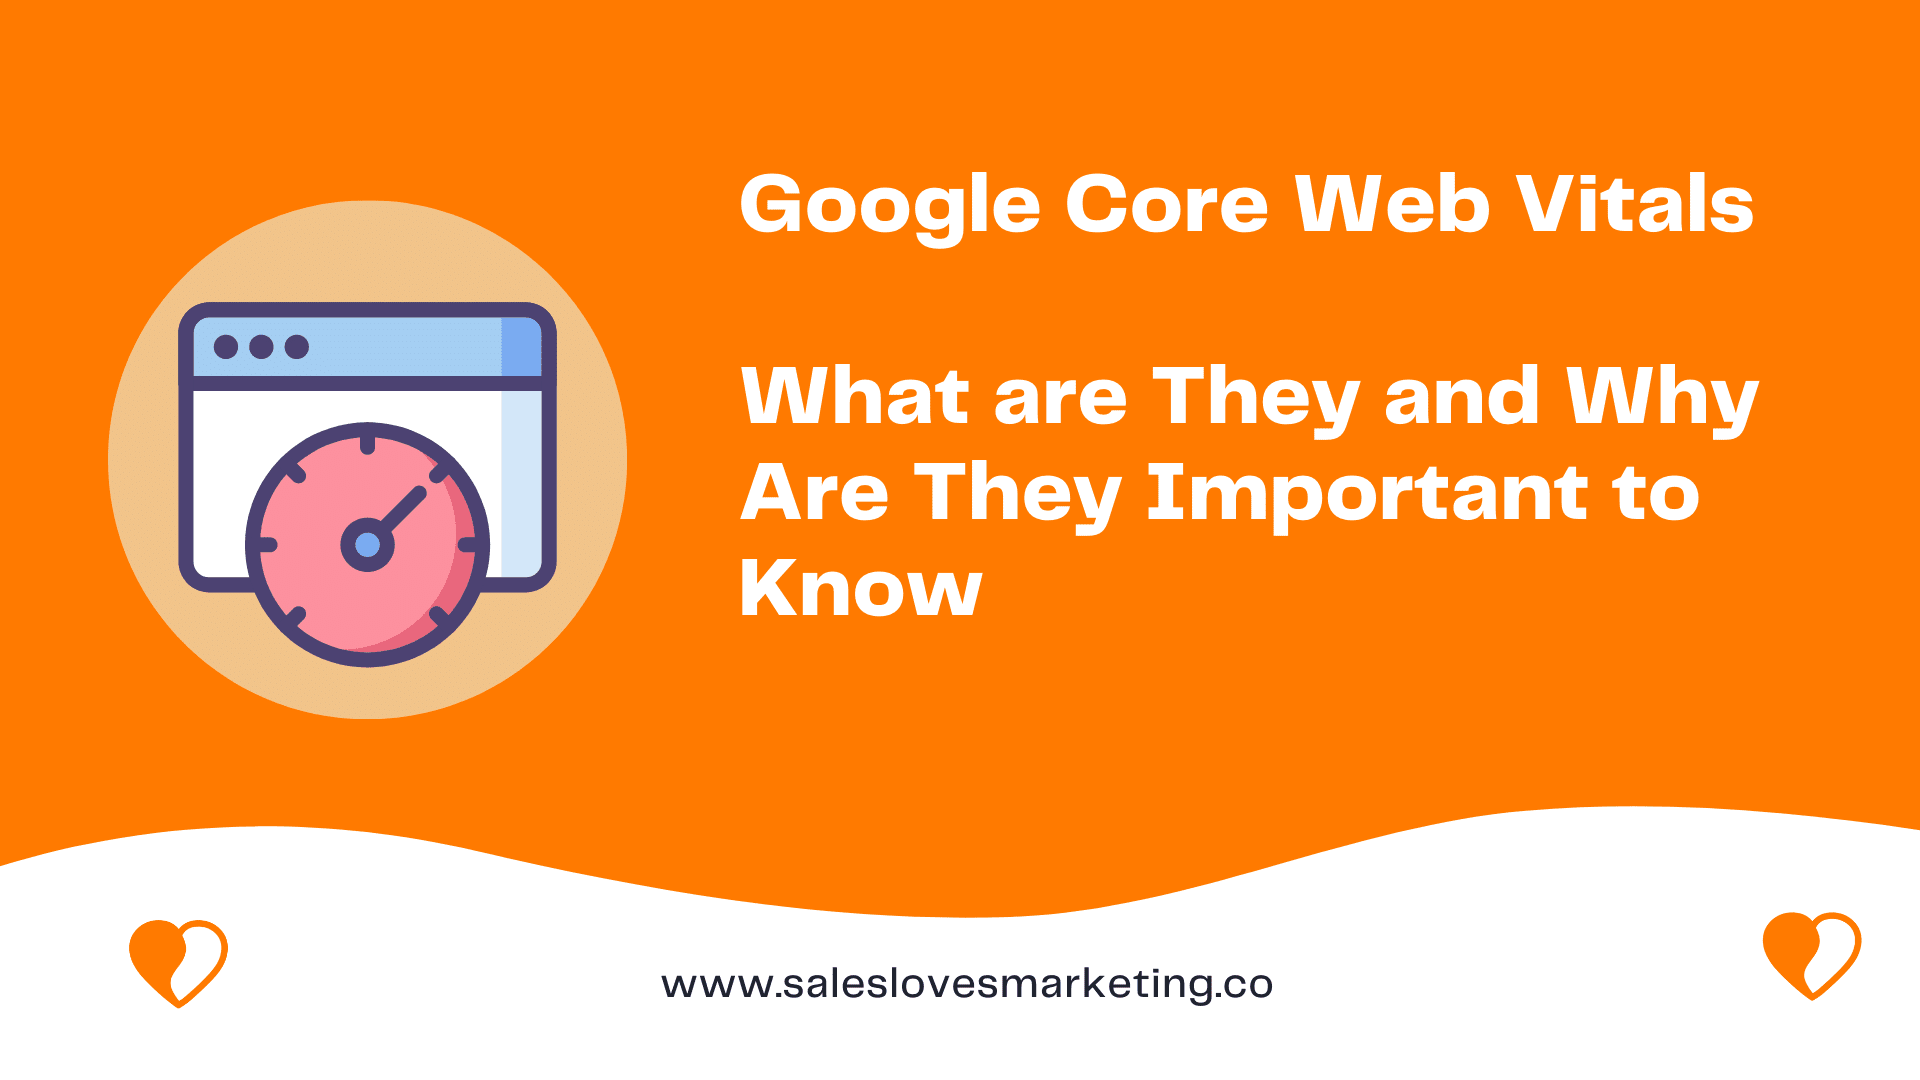 Google Core Web Vitals: What are They and Why Are They Important to Know